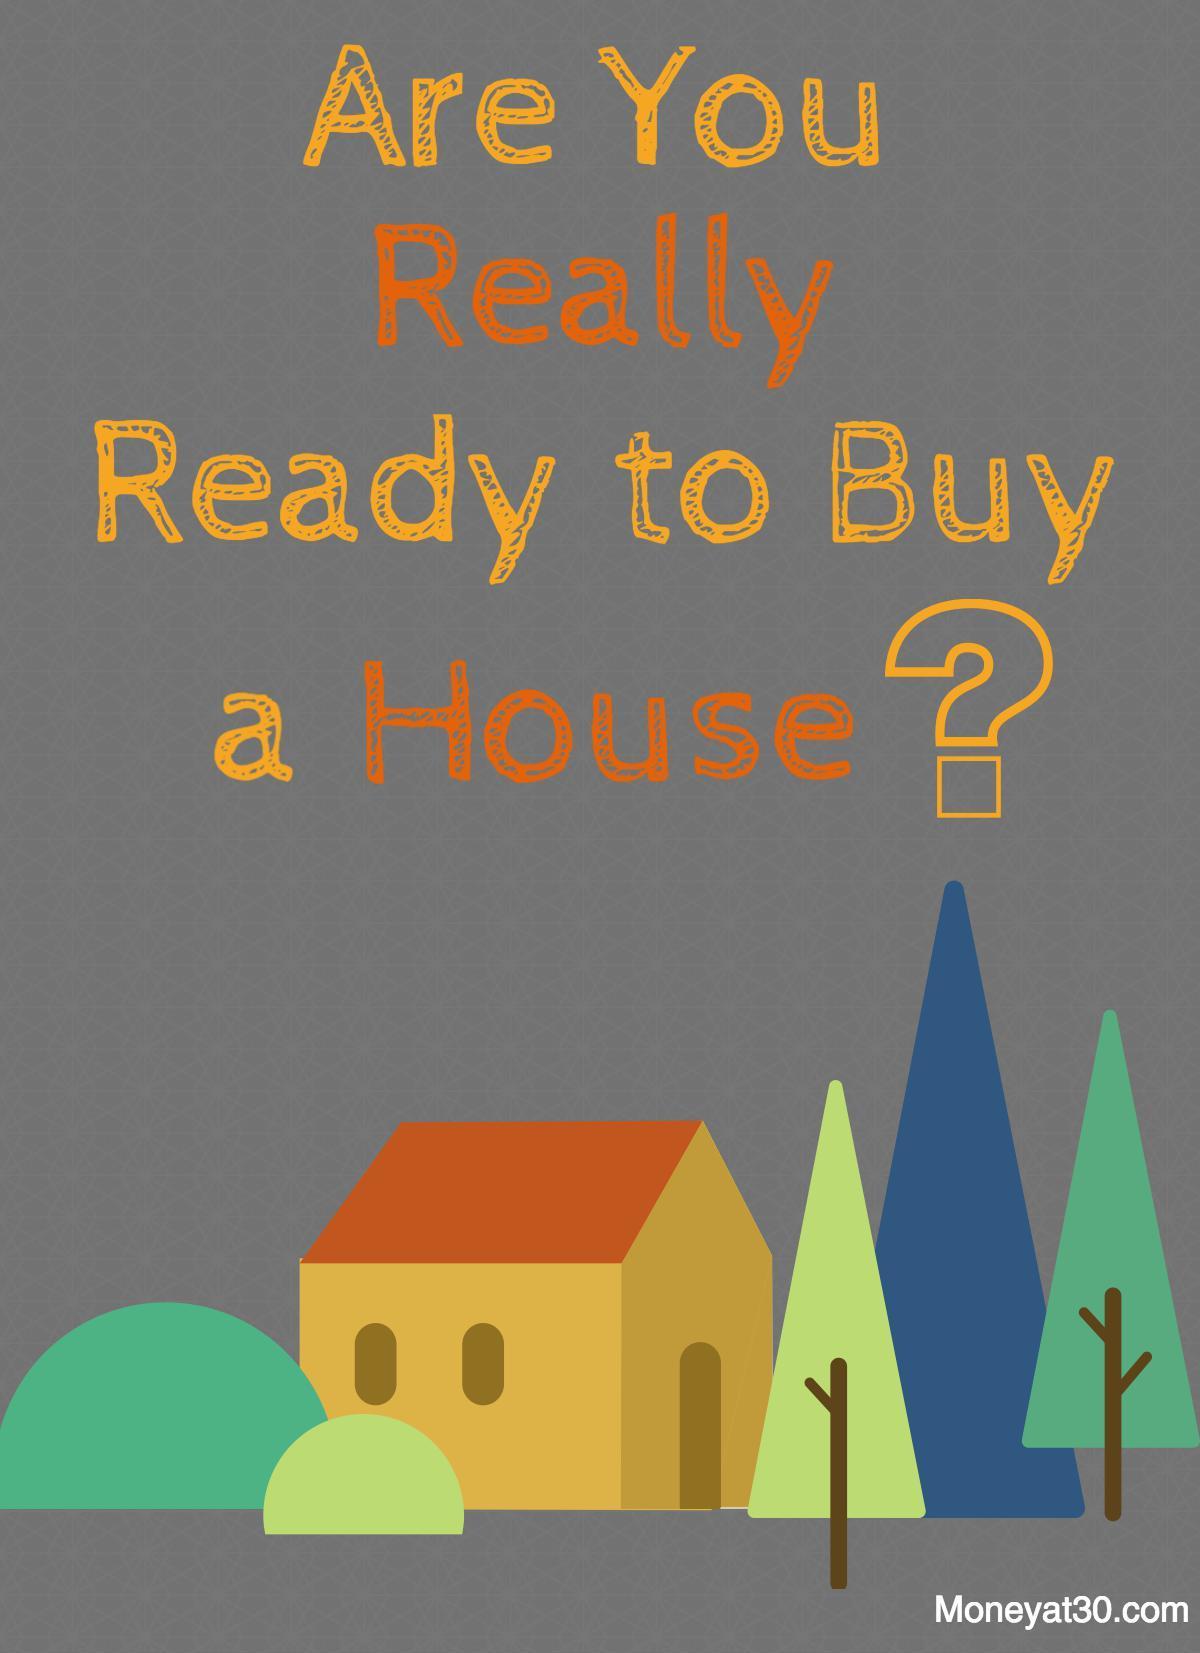 Are You Really Ready to Buy a House?